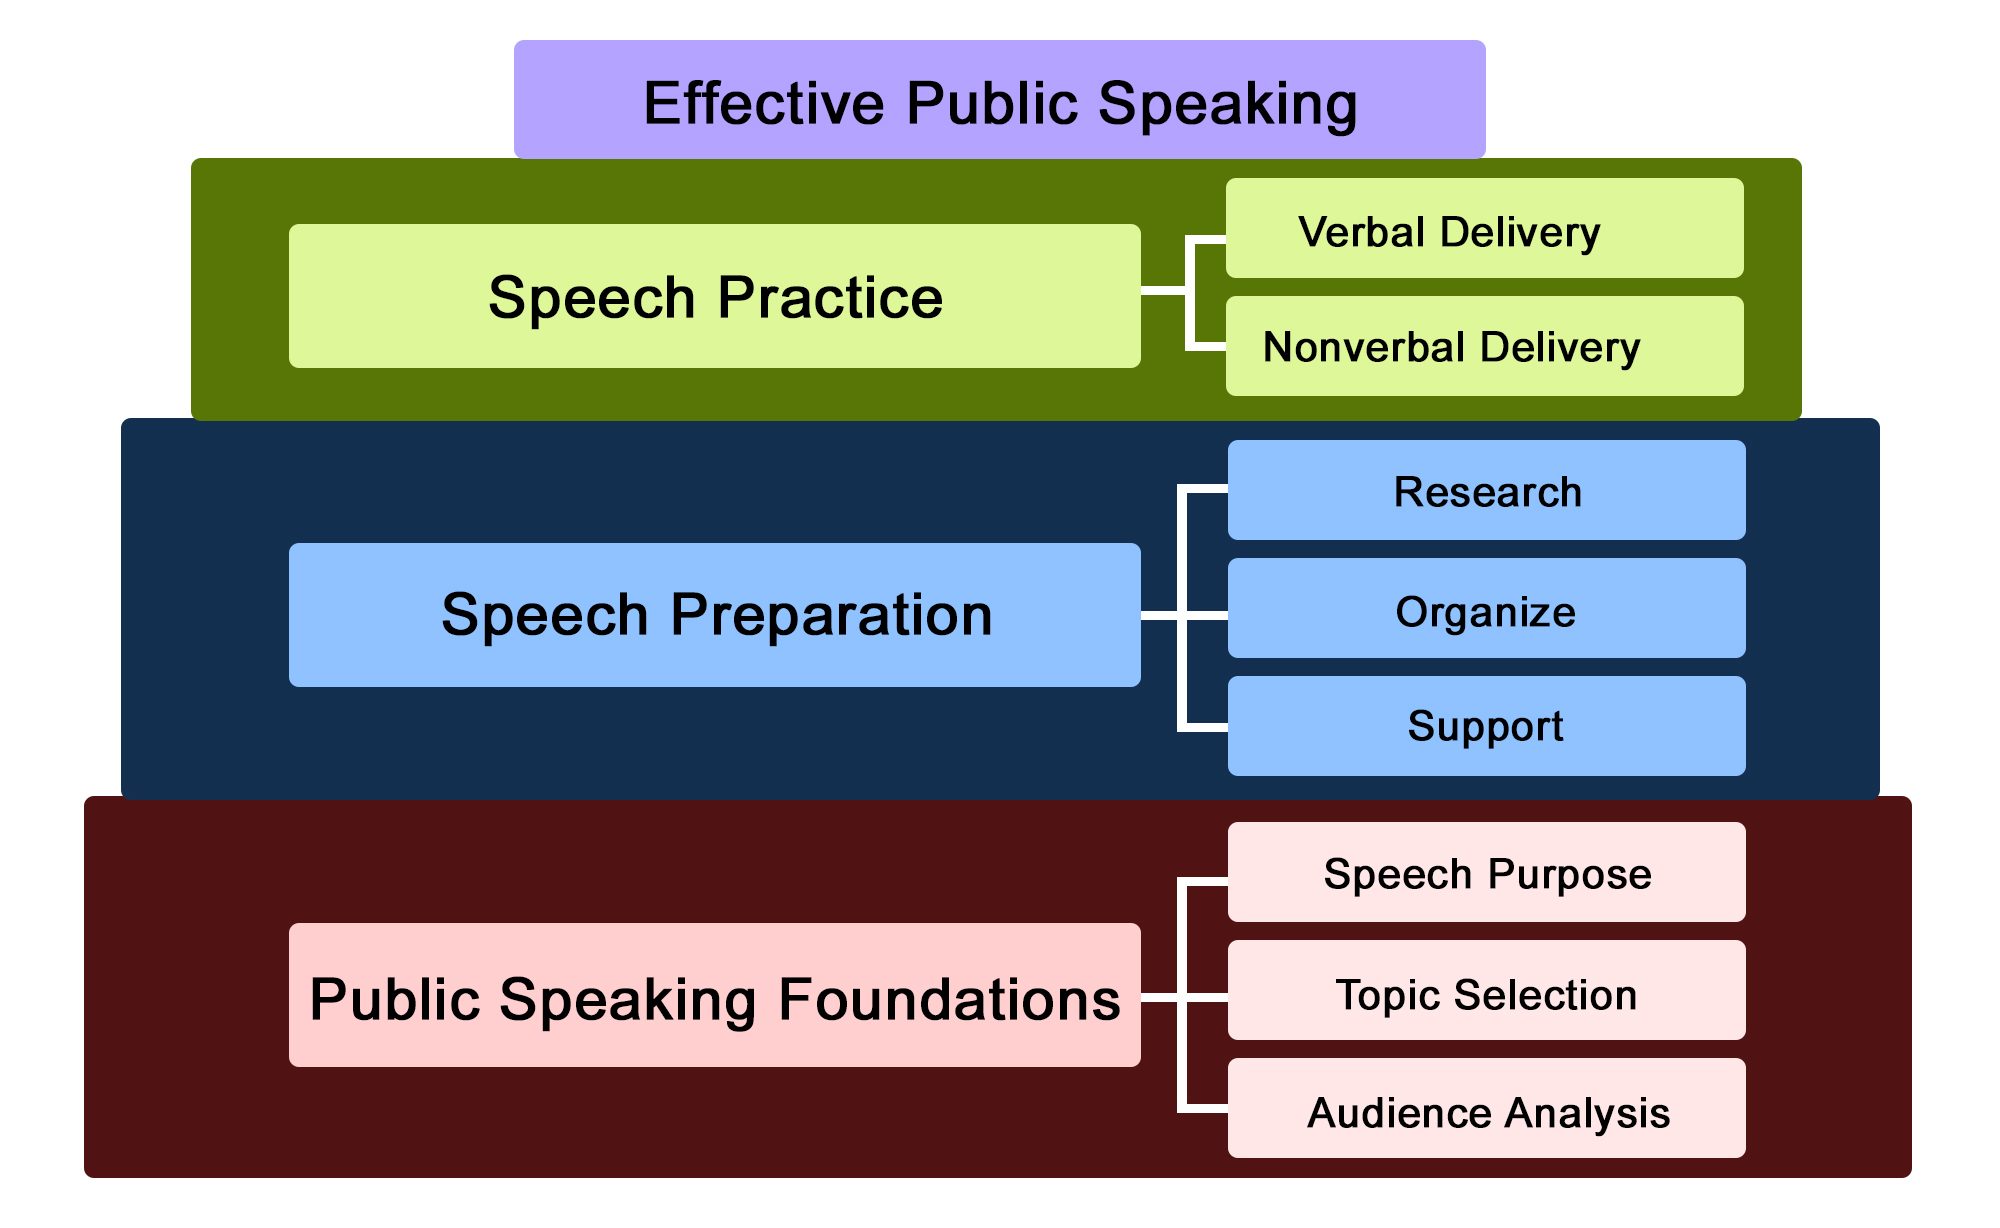 an effective oral presentation process follows how many steps